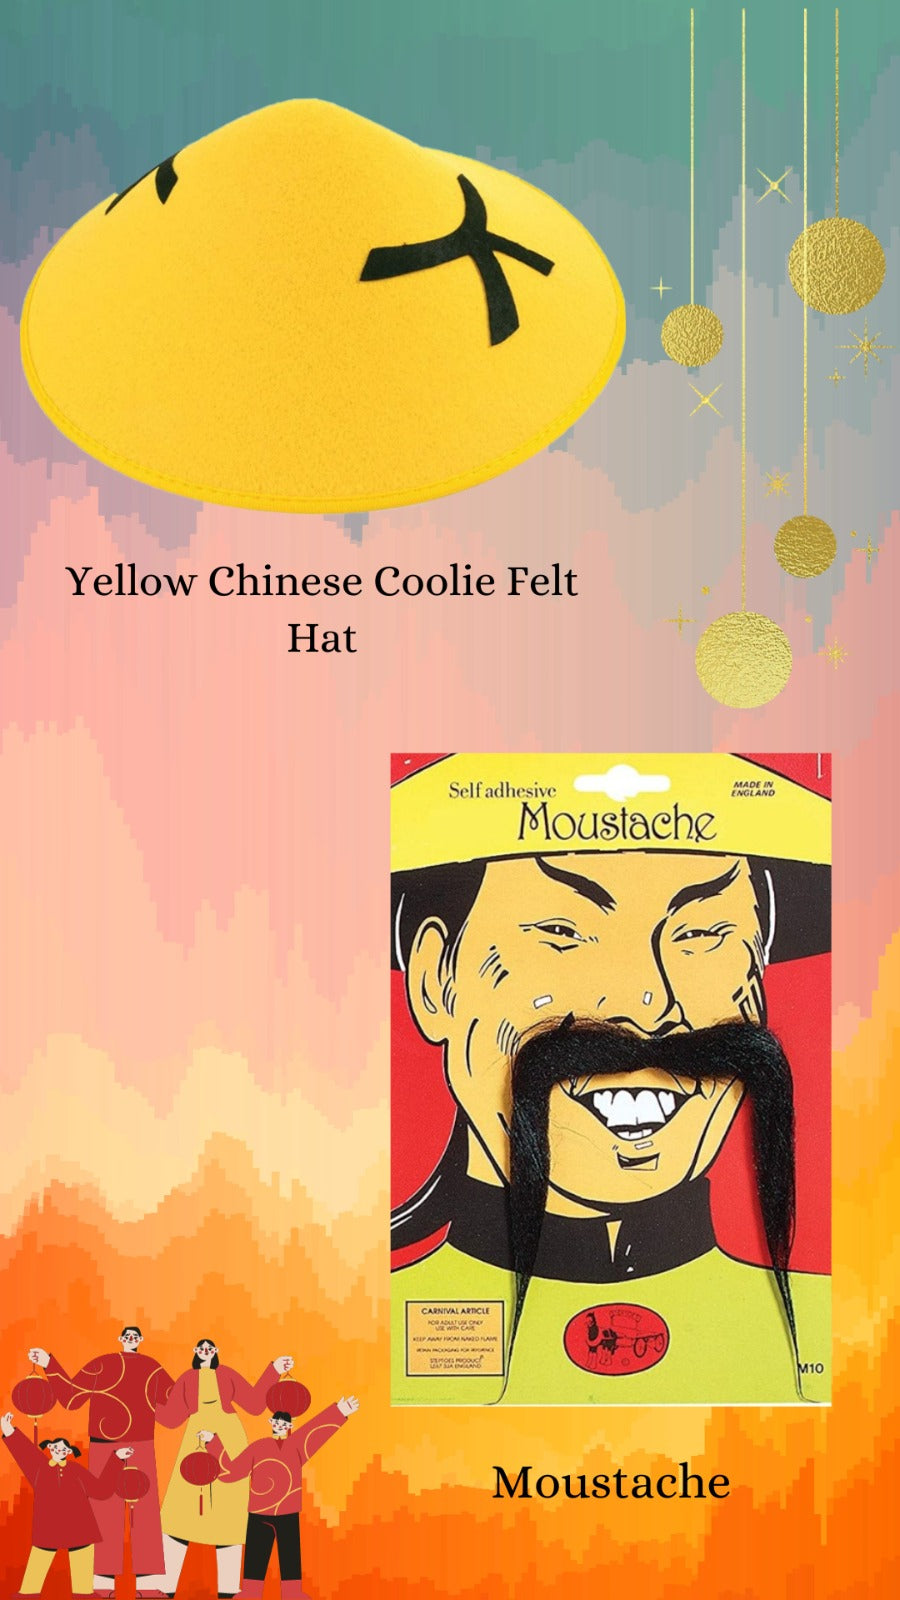 Authentic Charm: Yellow Chinese Coolie Felt Hat with Moustache - Mandarin Fancy Dress Accessory for Adults